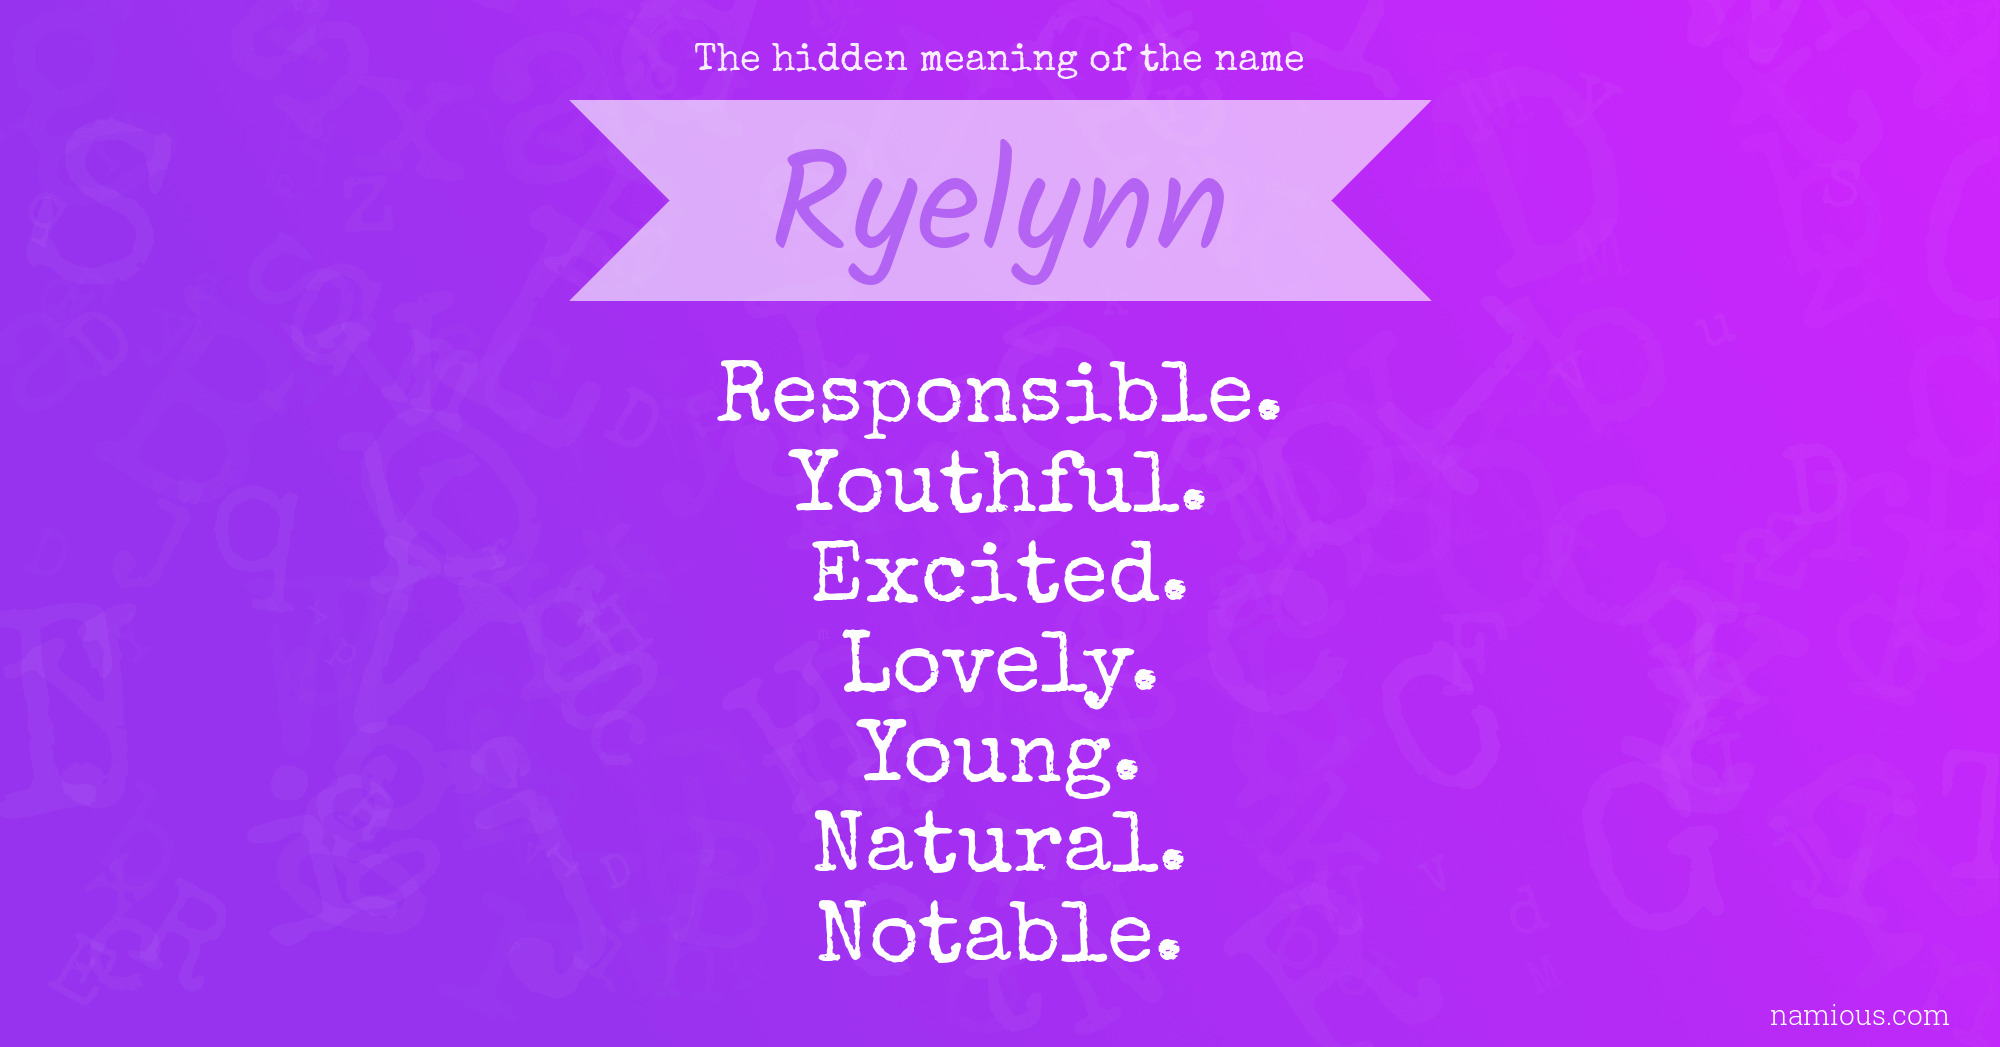 The hidden meaning of the name Ryelynn